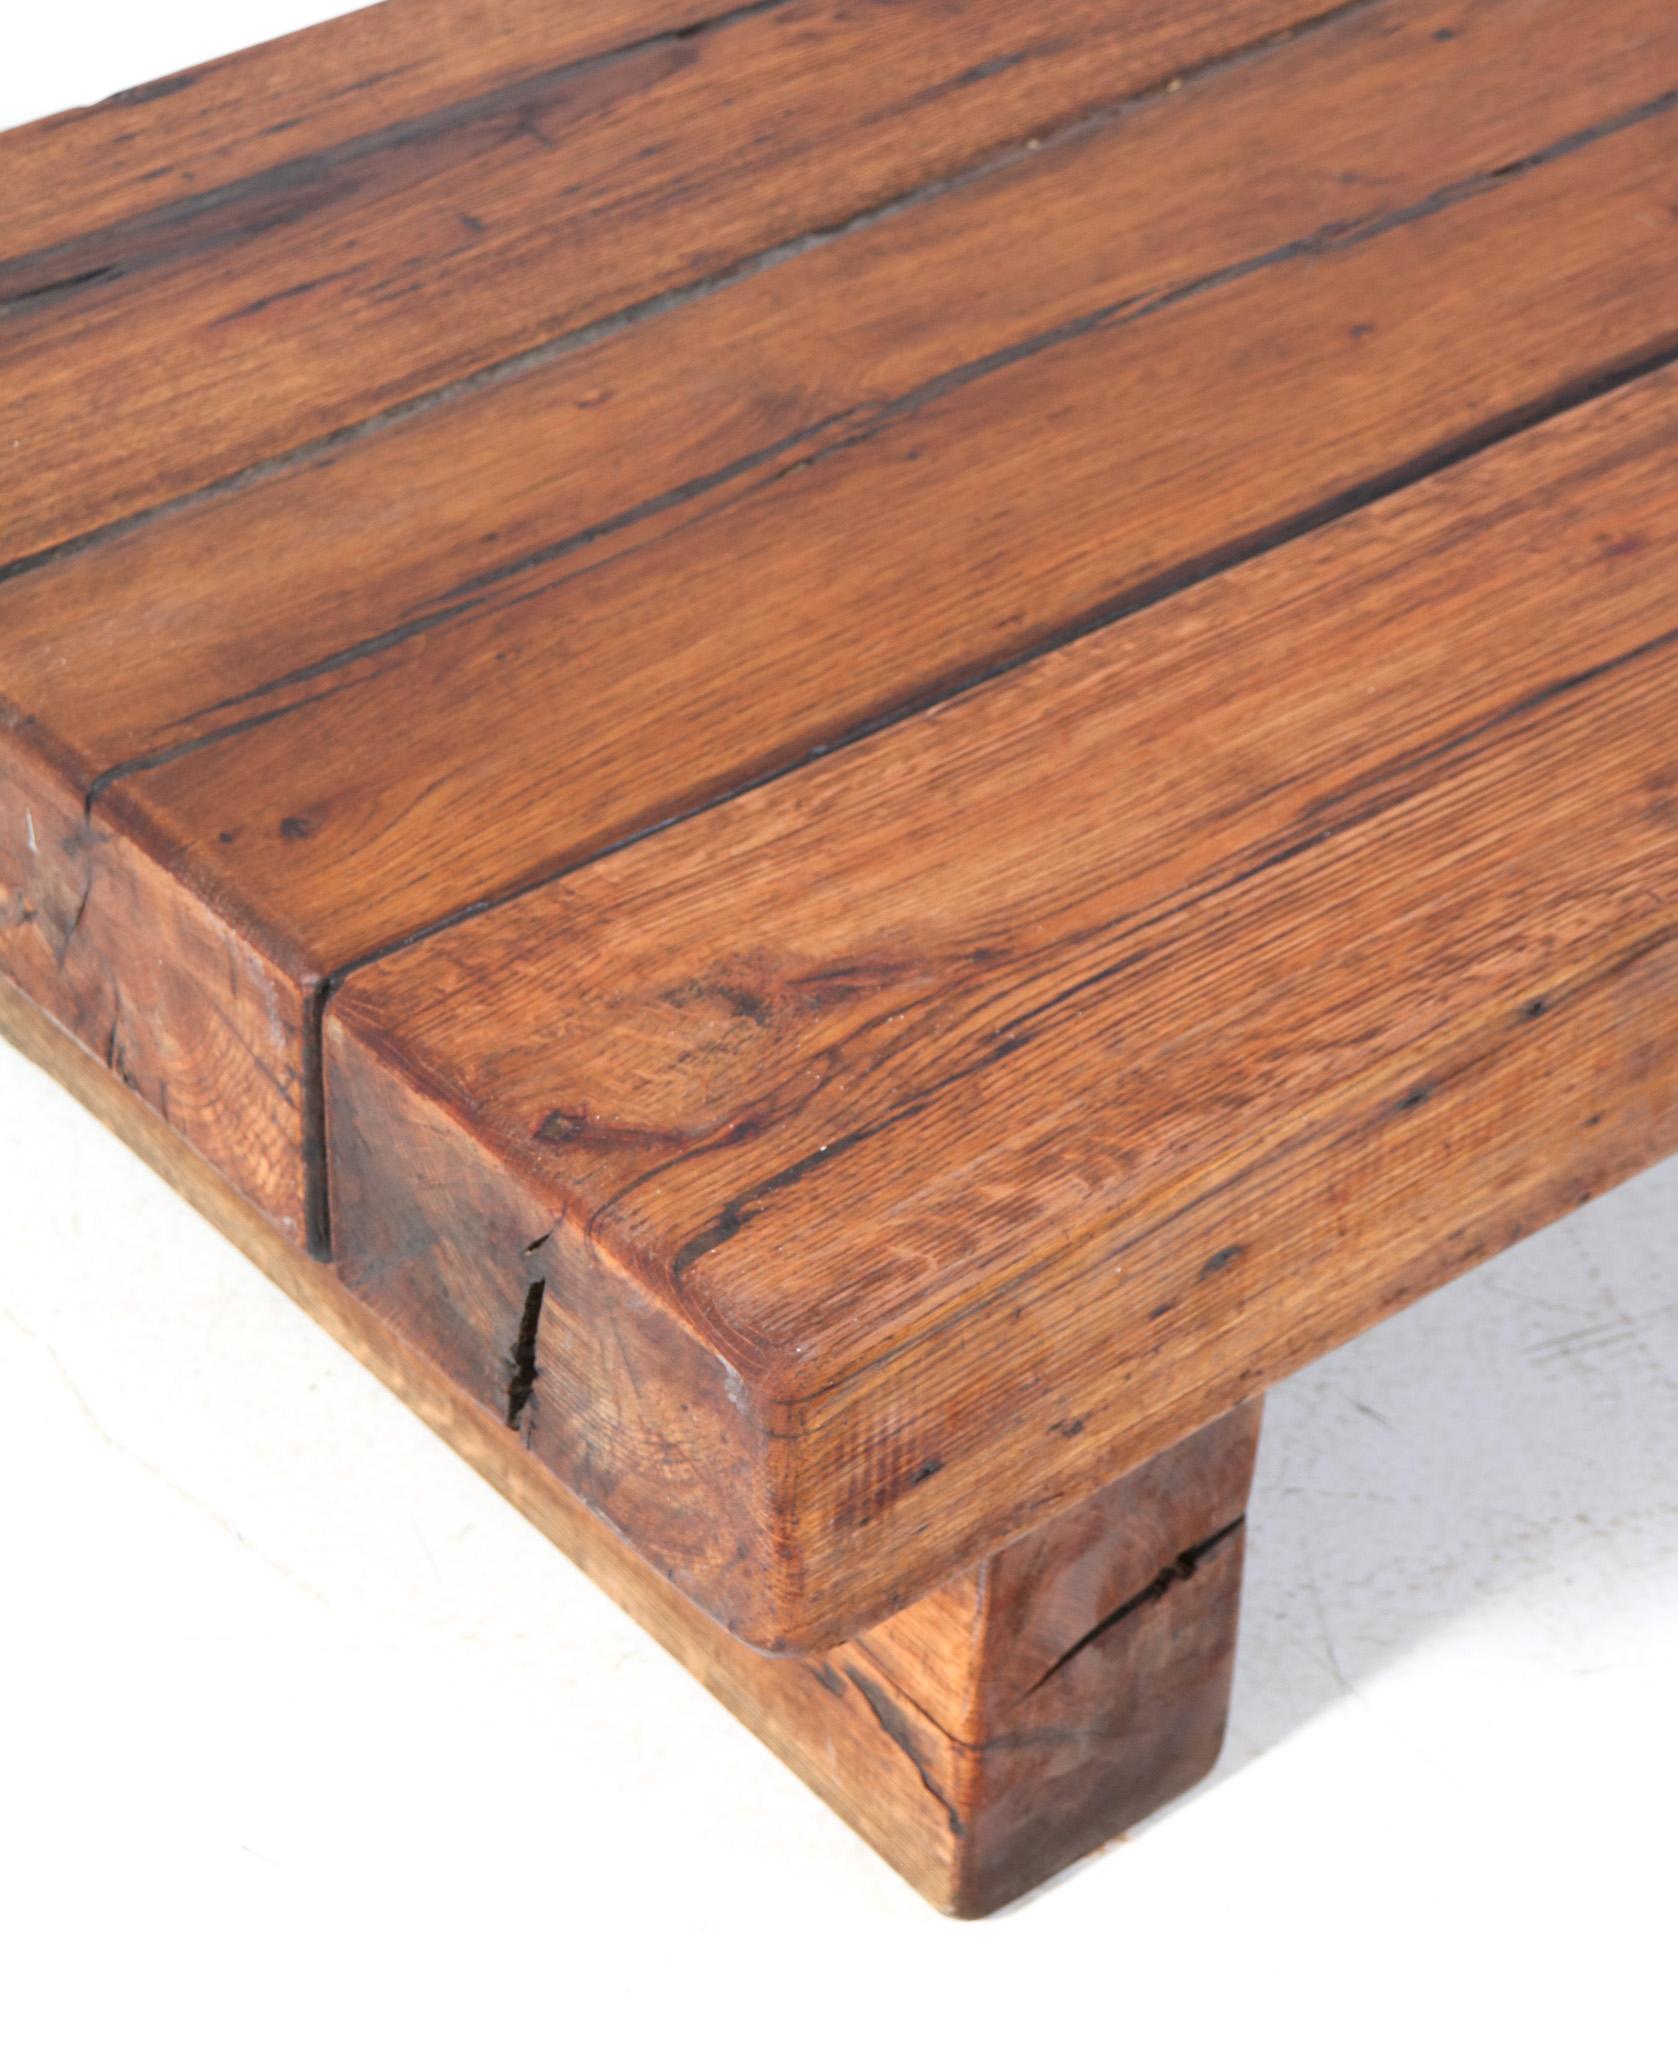 Oak Brutalist Rustic Coffee Table or Cocktail Table, 1960s For Sale 2